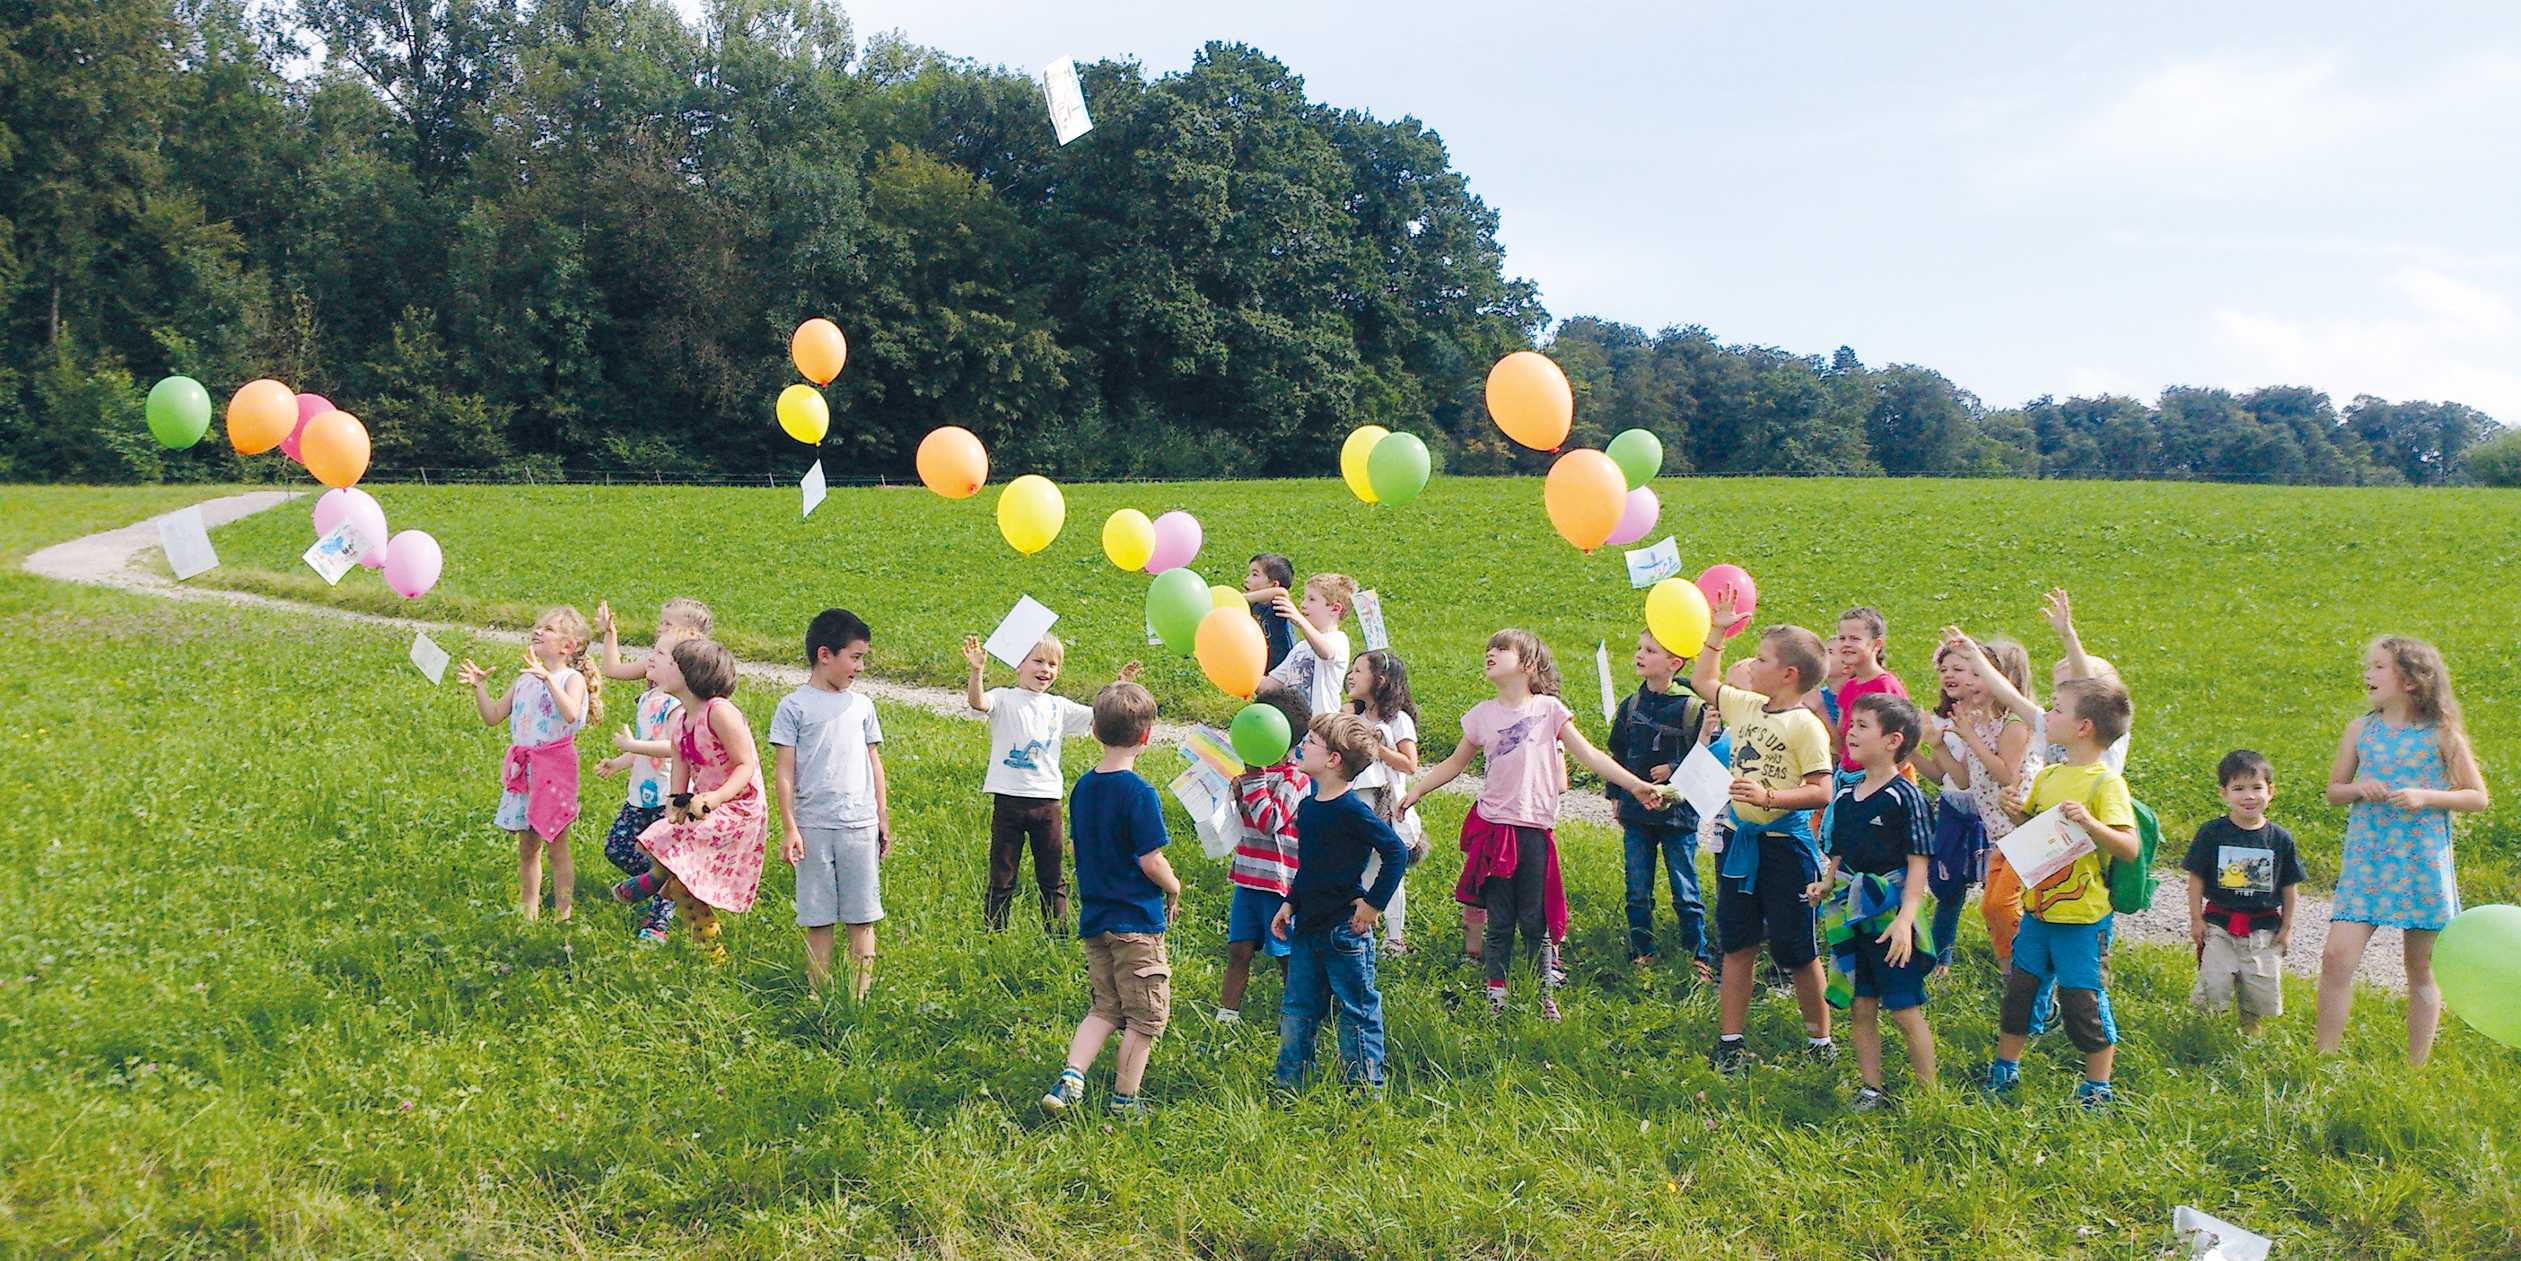 Kids playing with colourful balloons.